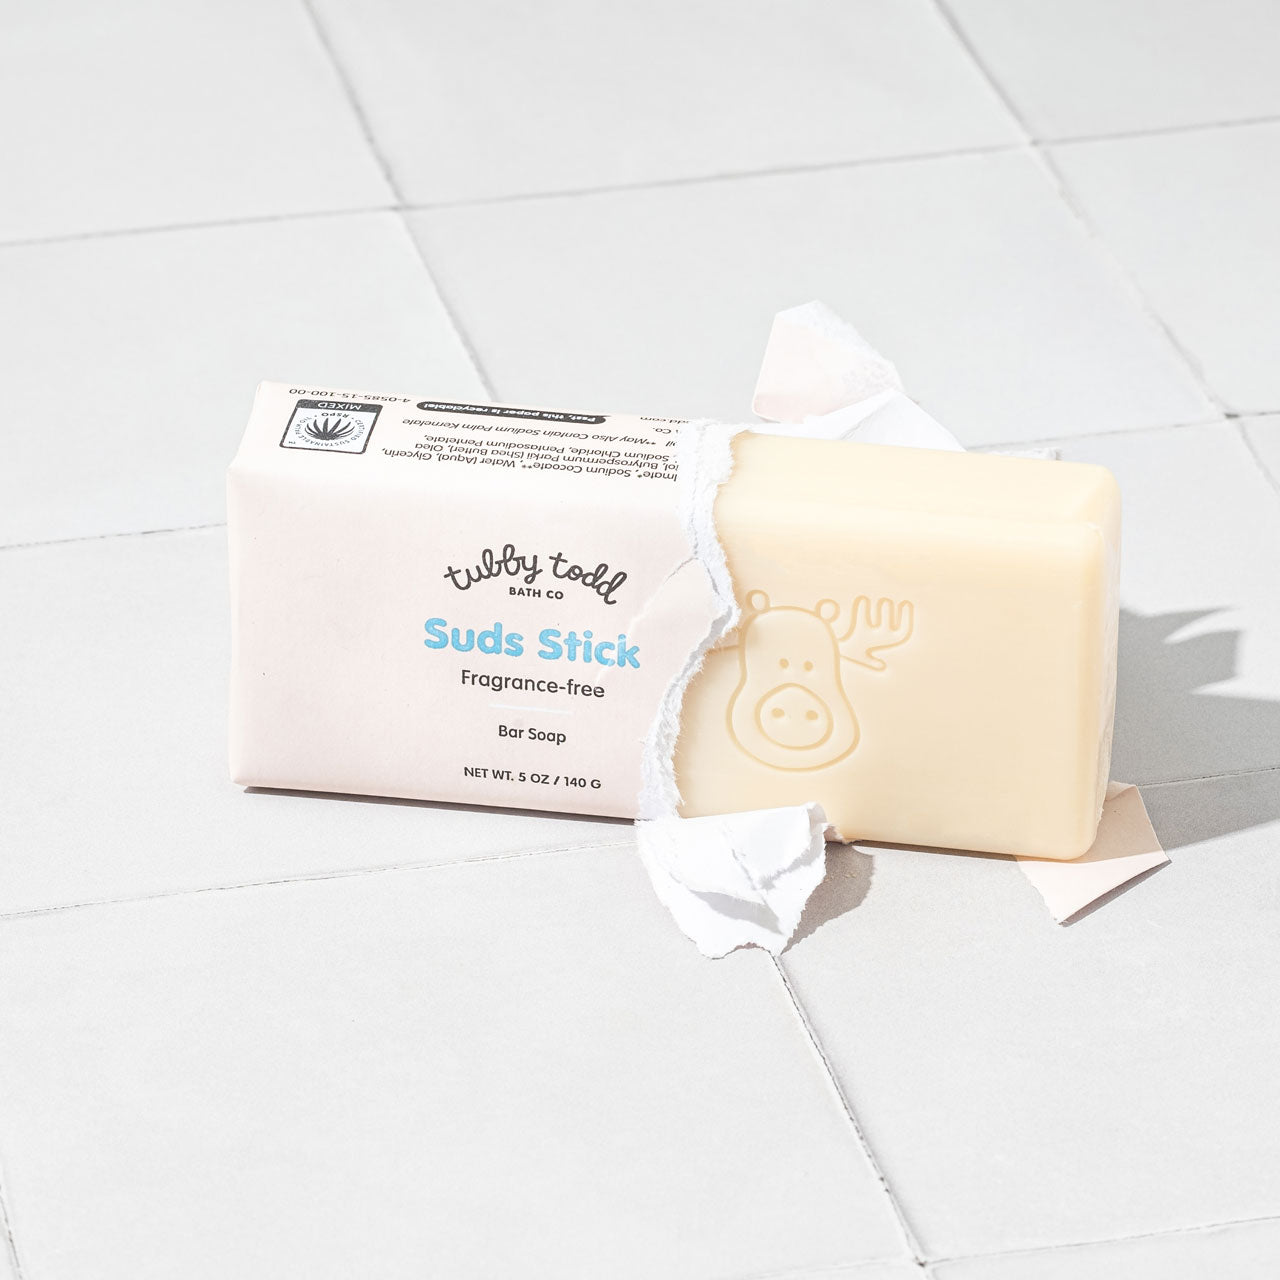 Suds Stick bar soap coming out of paper packaging